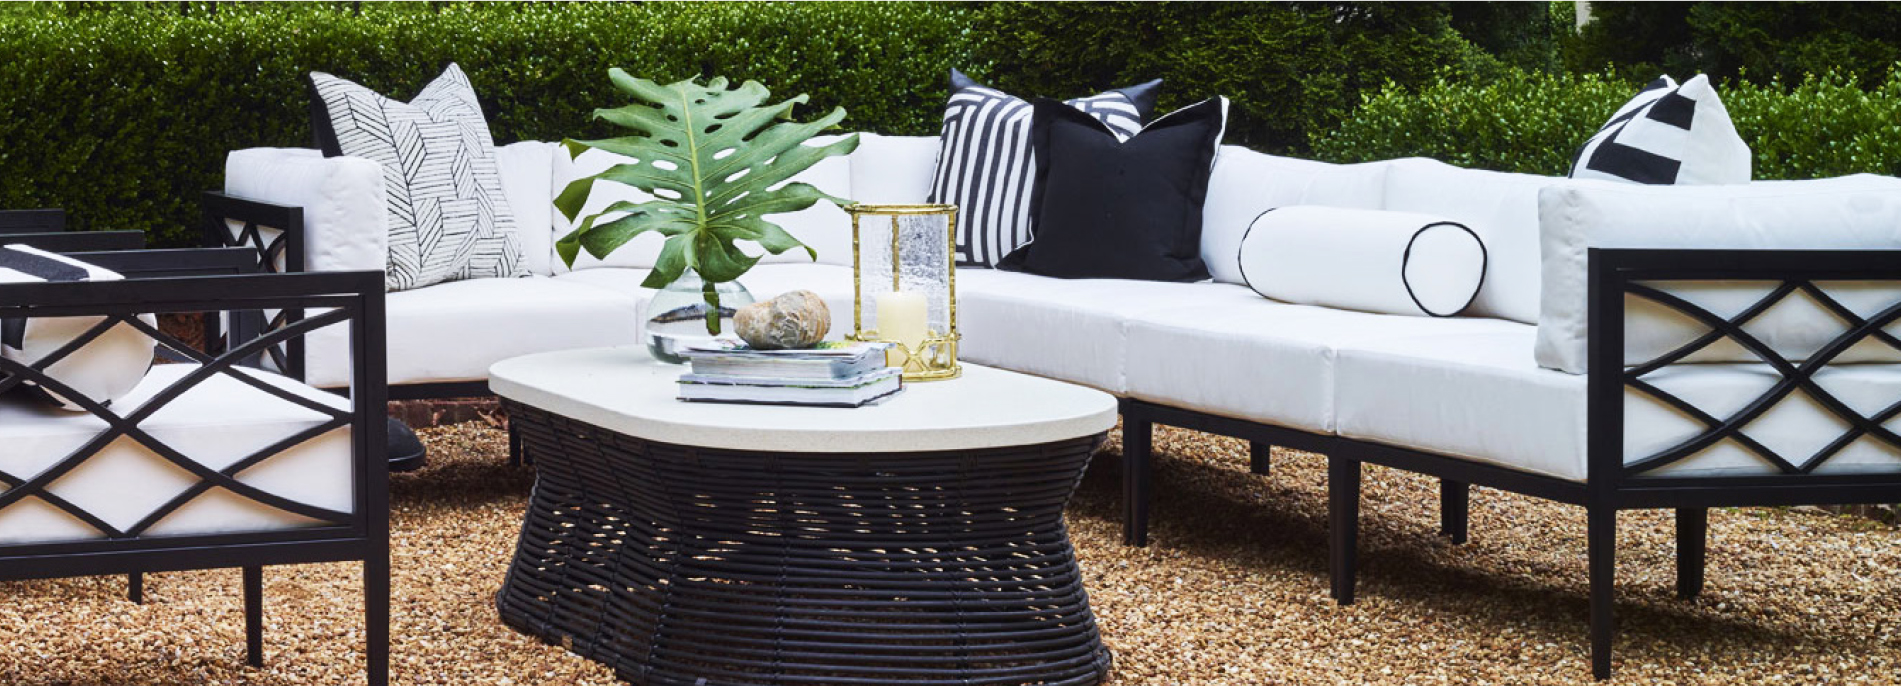 Beautiful Black and White Outdoor Patio Furniture